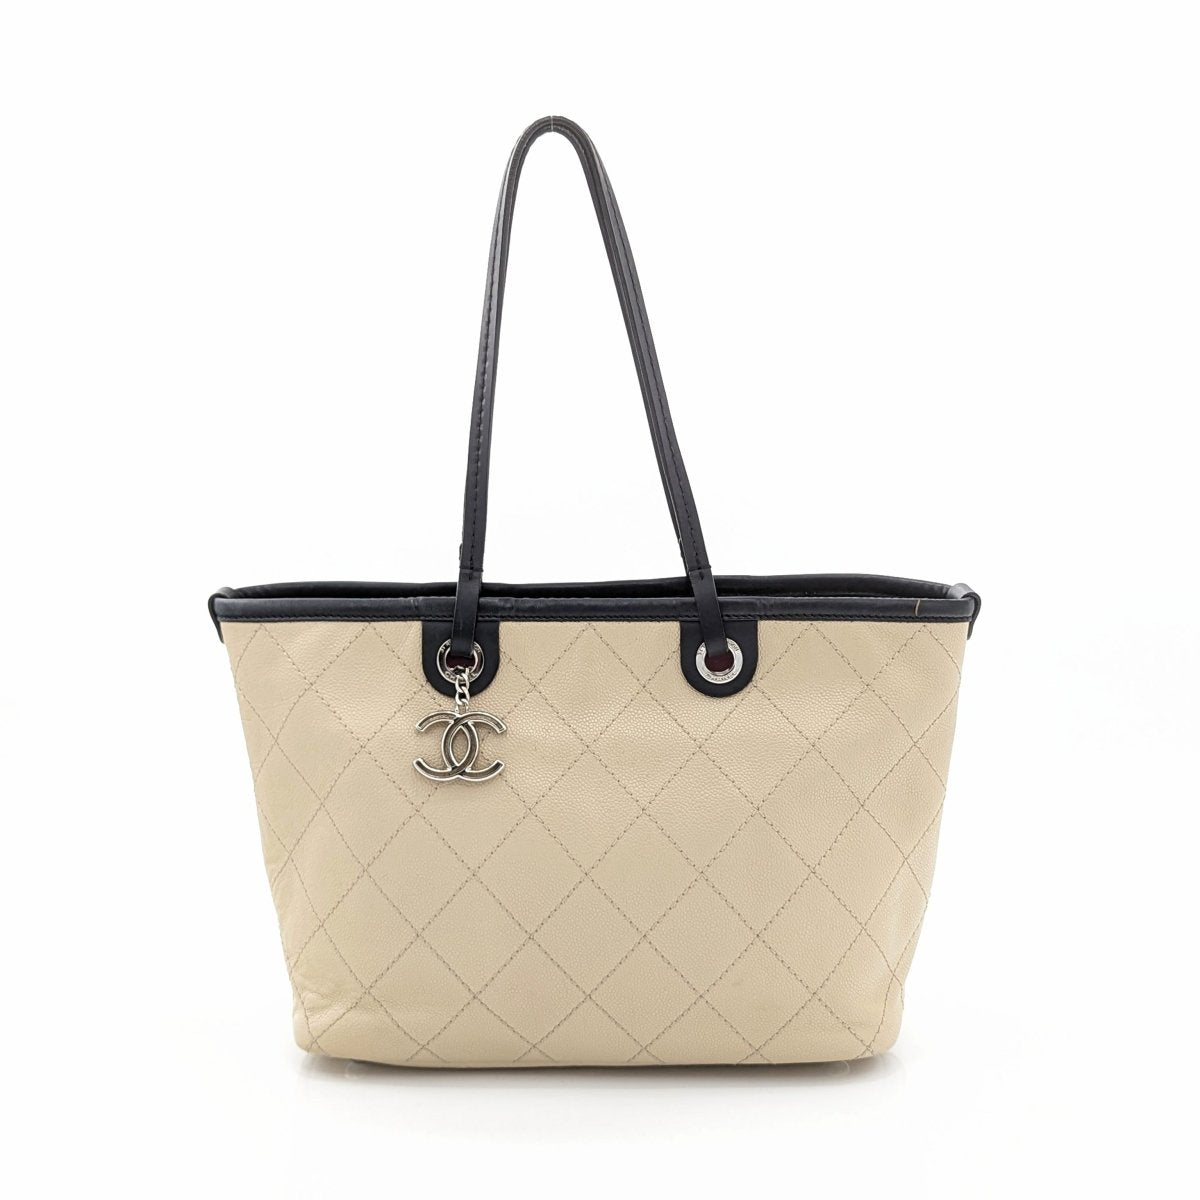 Chanel Large Shopping Fever Tote